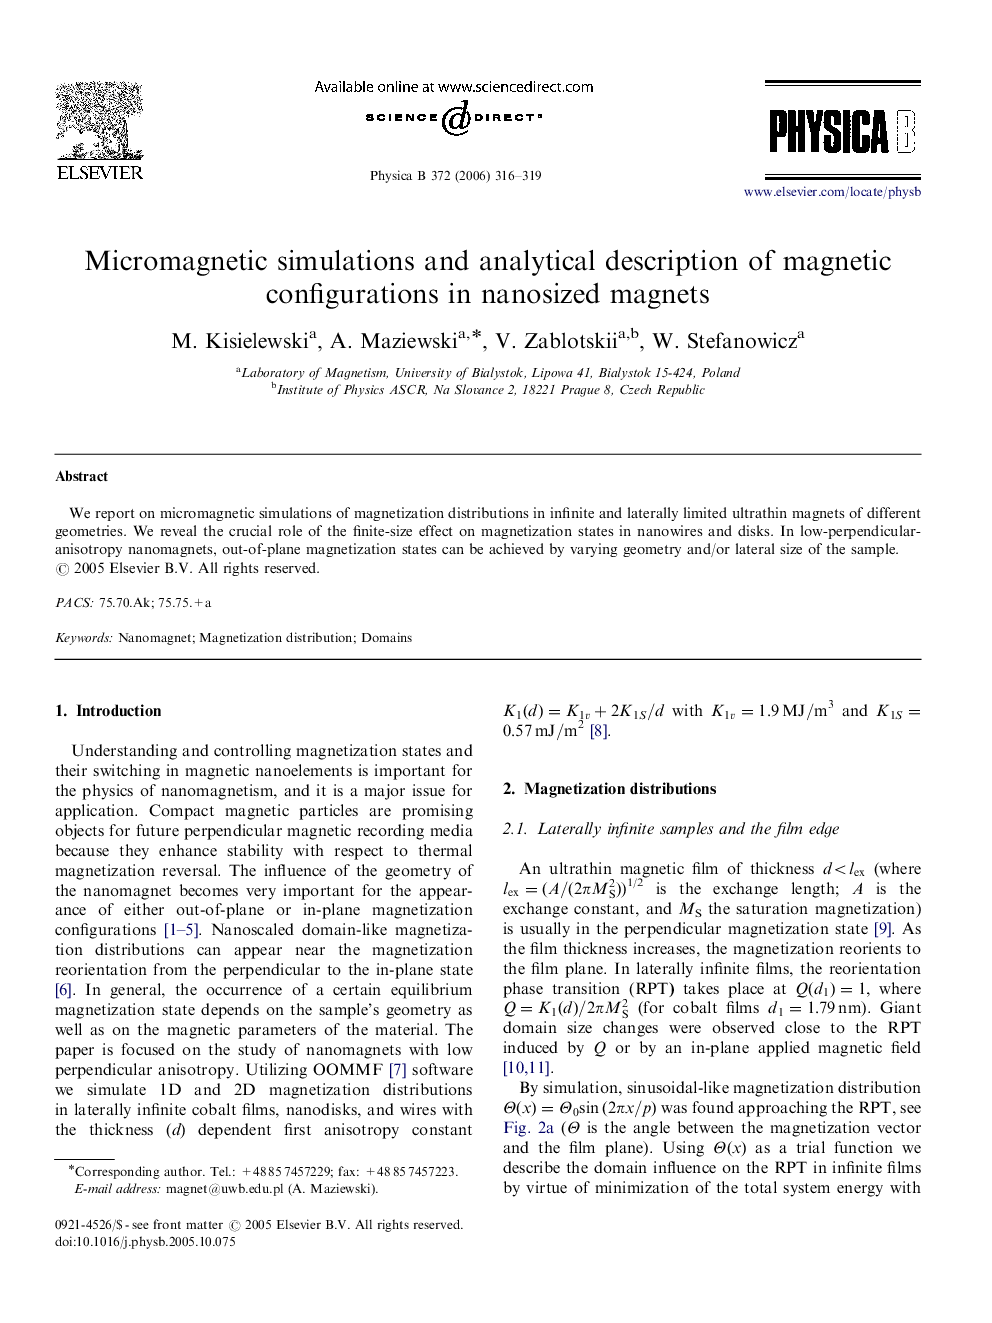 Micromagnetic simulations and analytical description of magnetic configurations in nanosized magnets